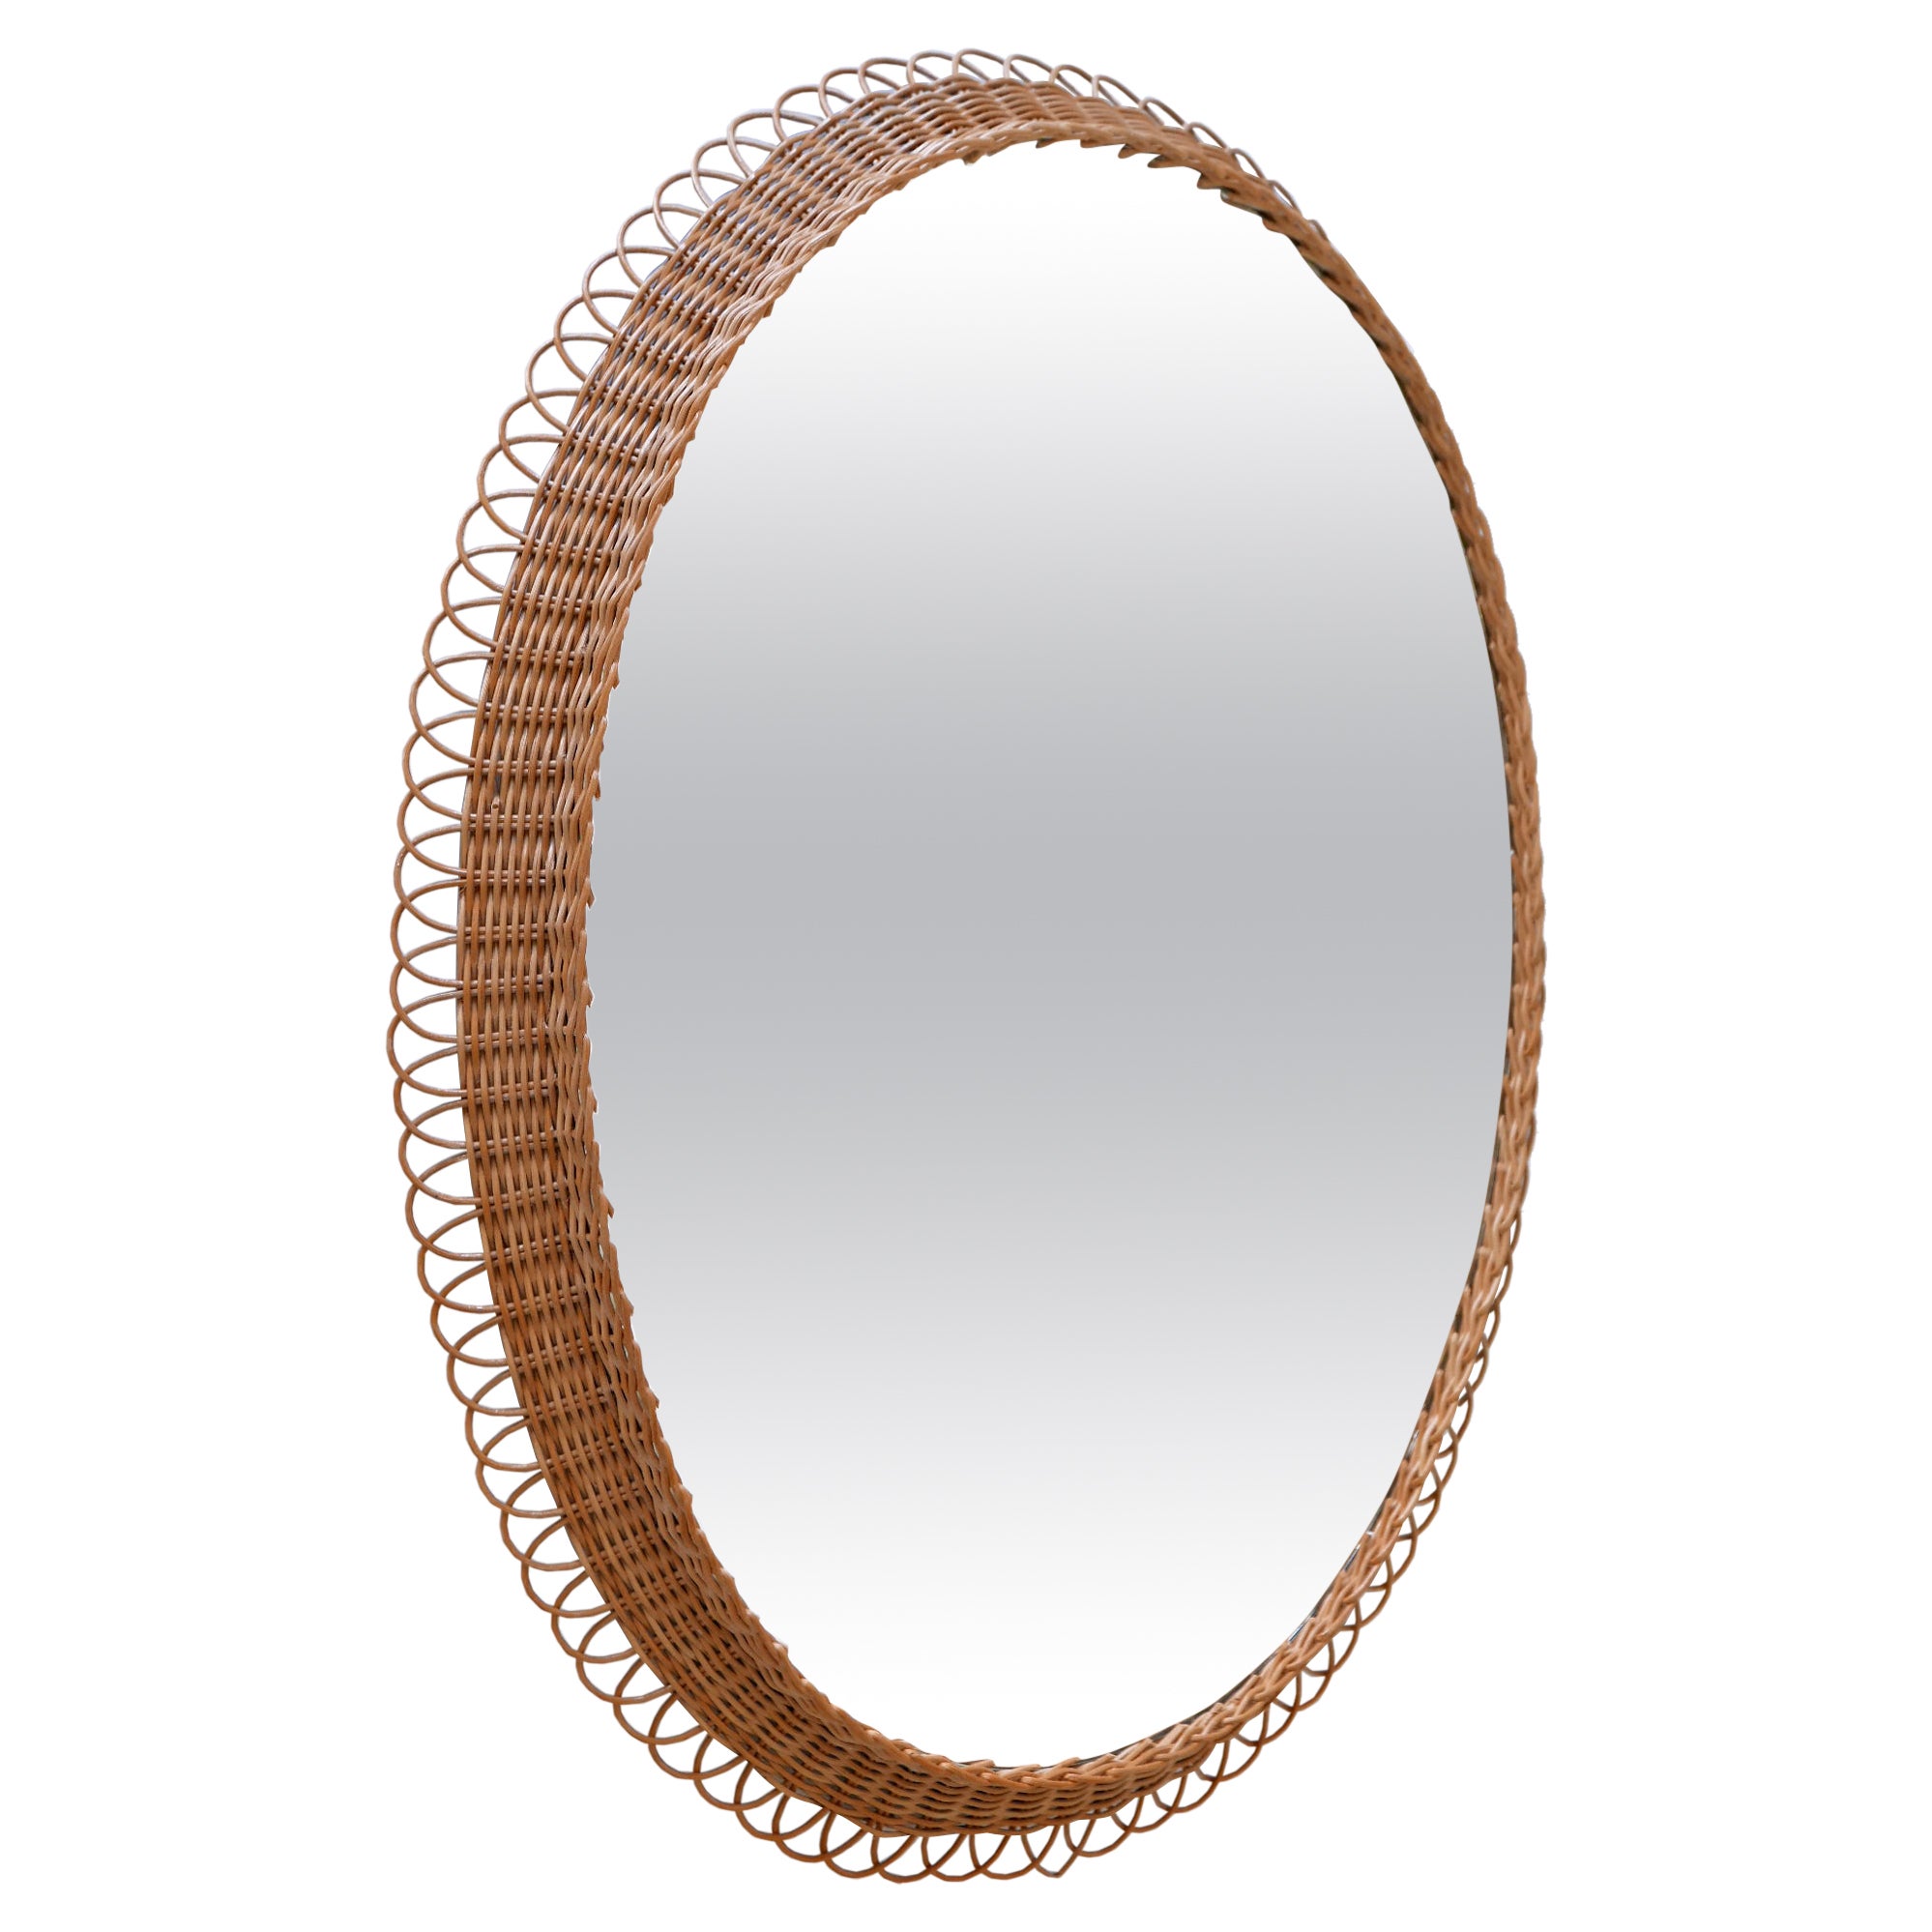 Decorative Mid-Century Modern Rattan Oval Wall Mirror Germany, 1960s For Sale